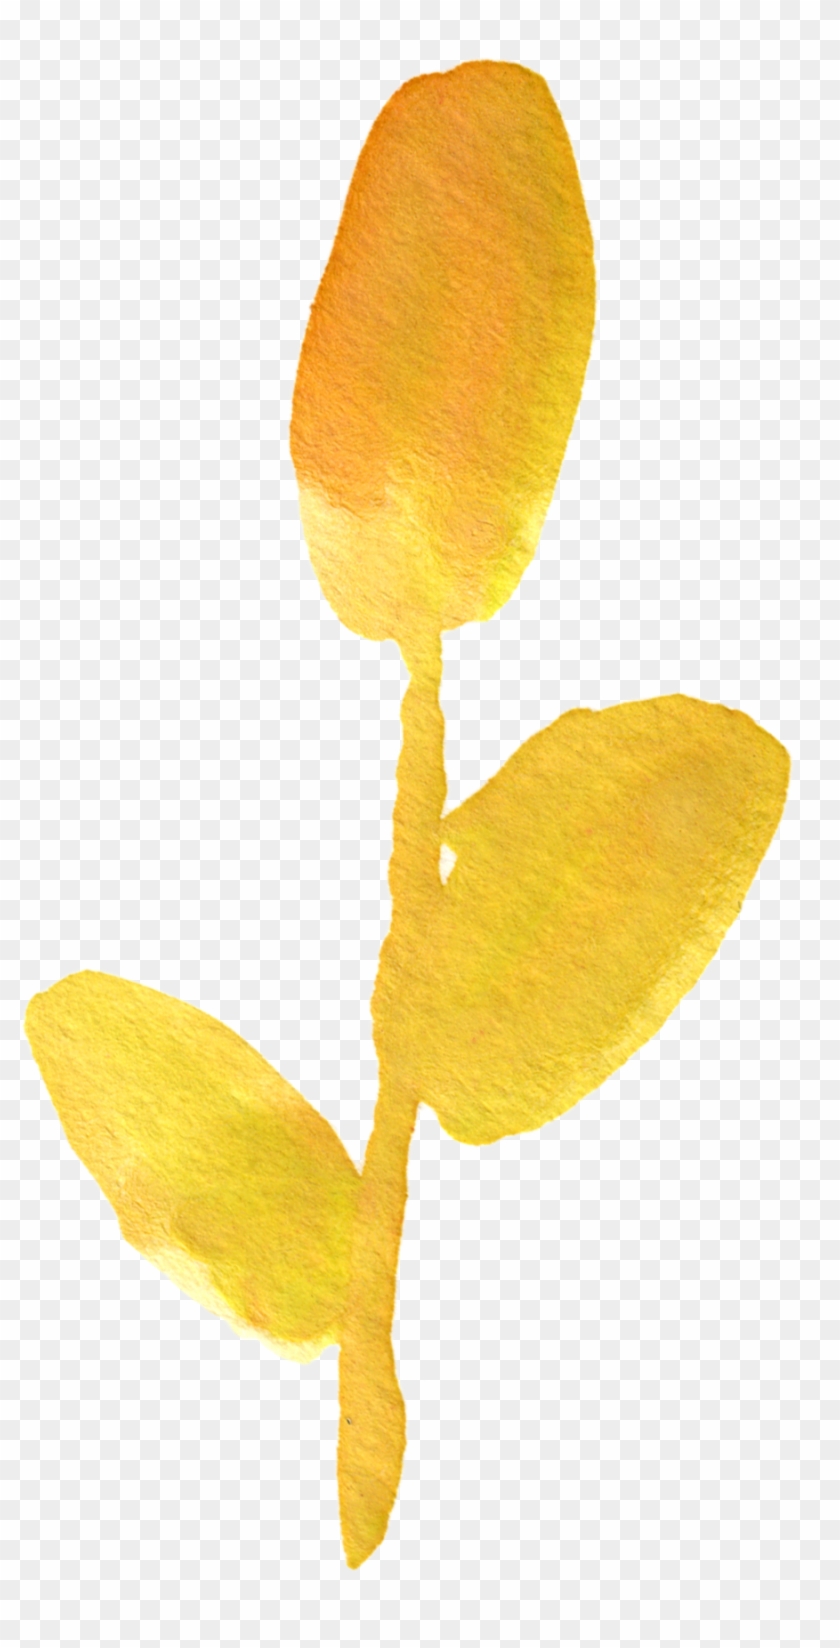 1 - Watercolor Yellow Flower Png Free #93597